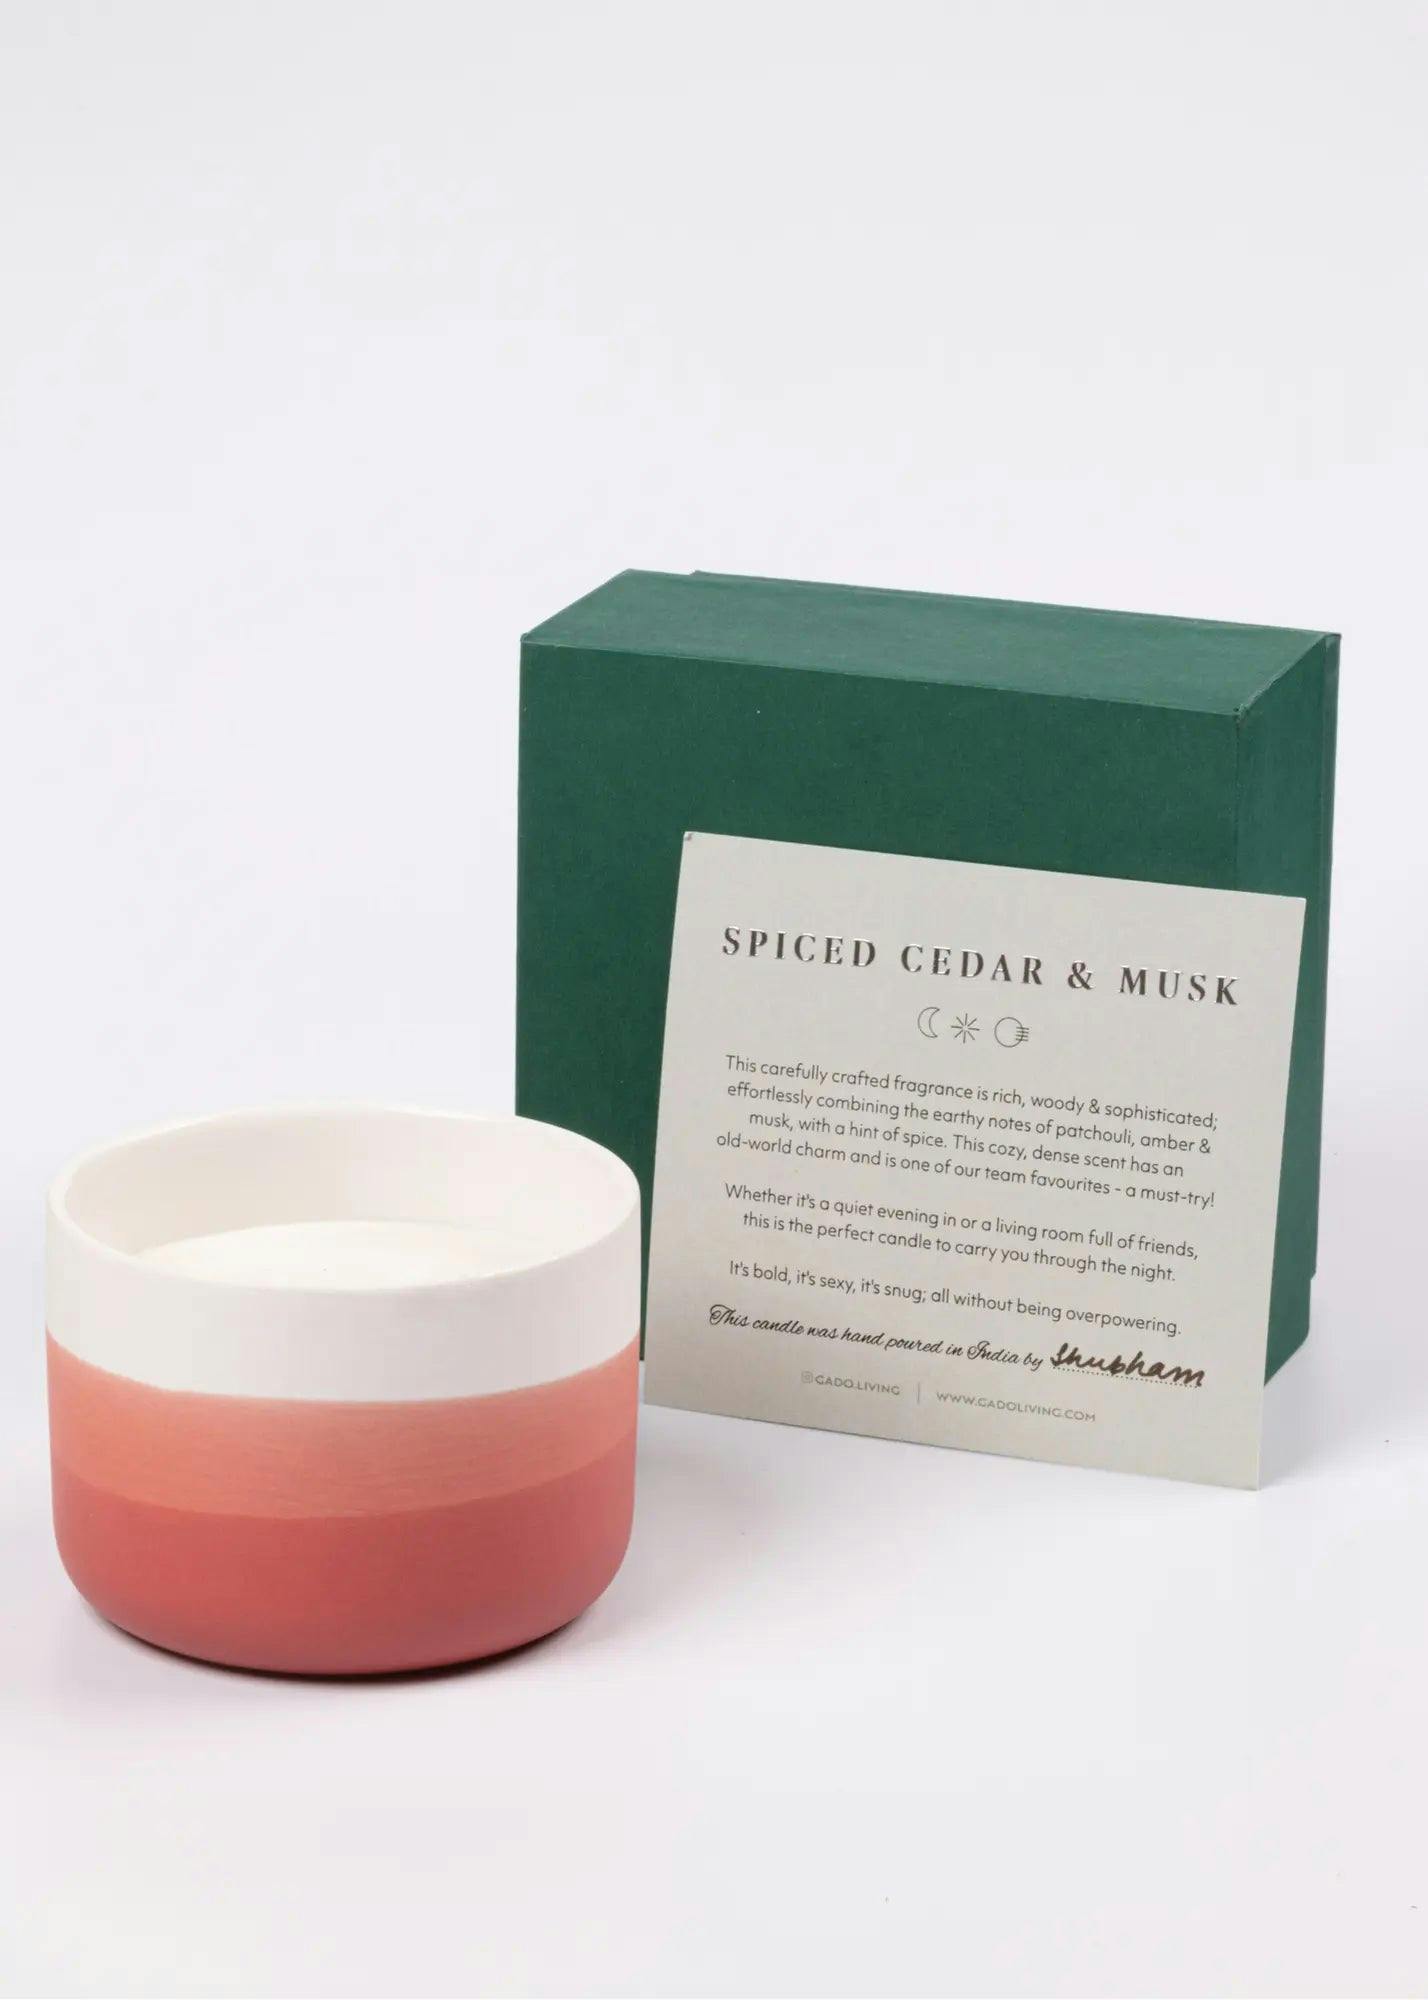 Naira Candle - Spiced Cedar & Musk, a product by Gado Living